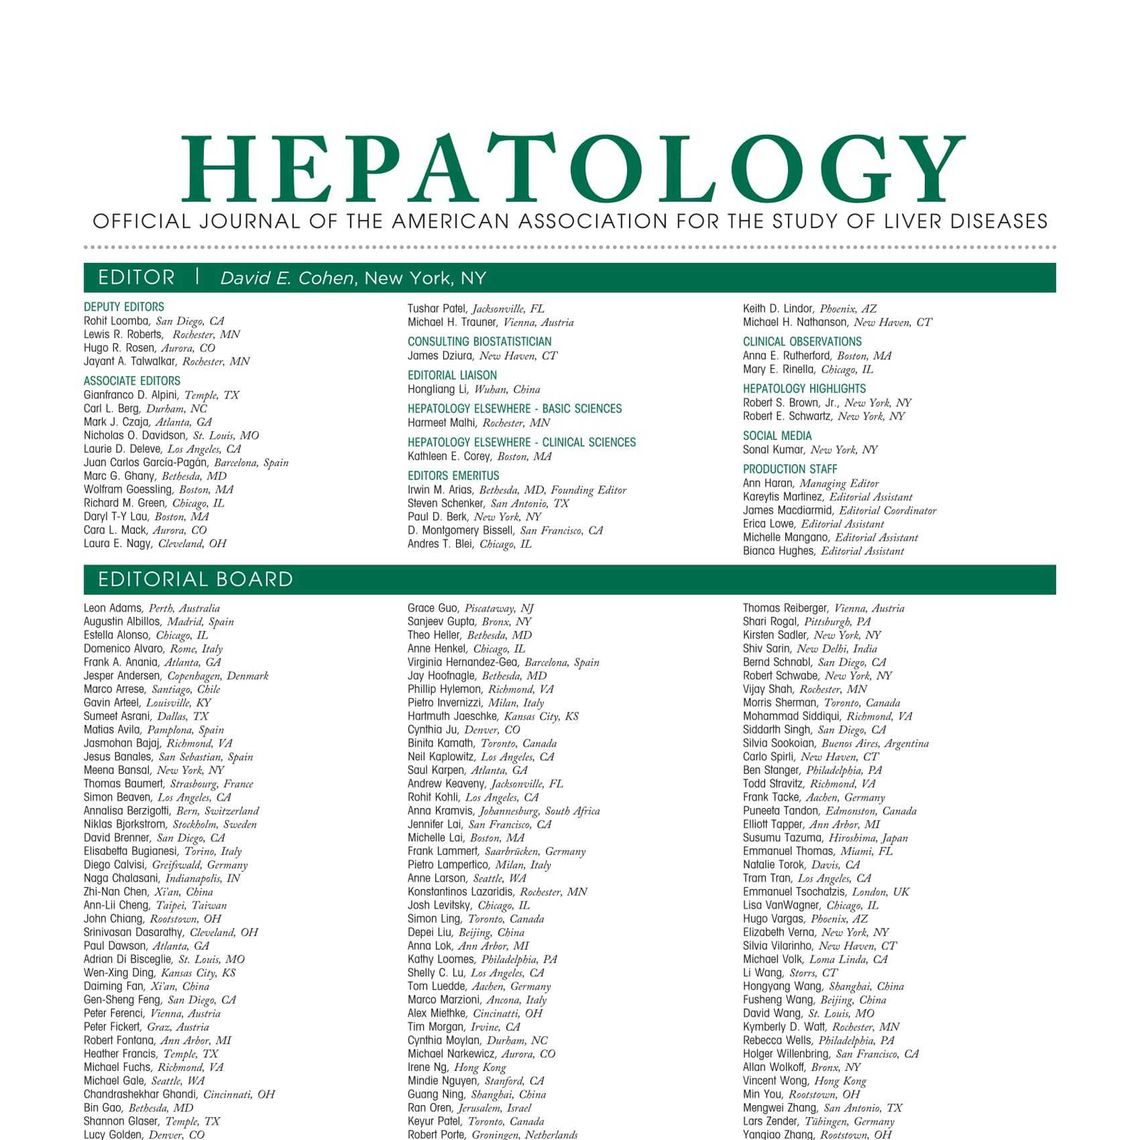 Identifying Barriers to Hepatocellular Carcinoma Surveillance in a National Sample of Patients with Cirrhosis.